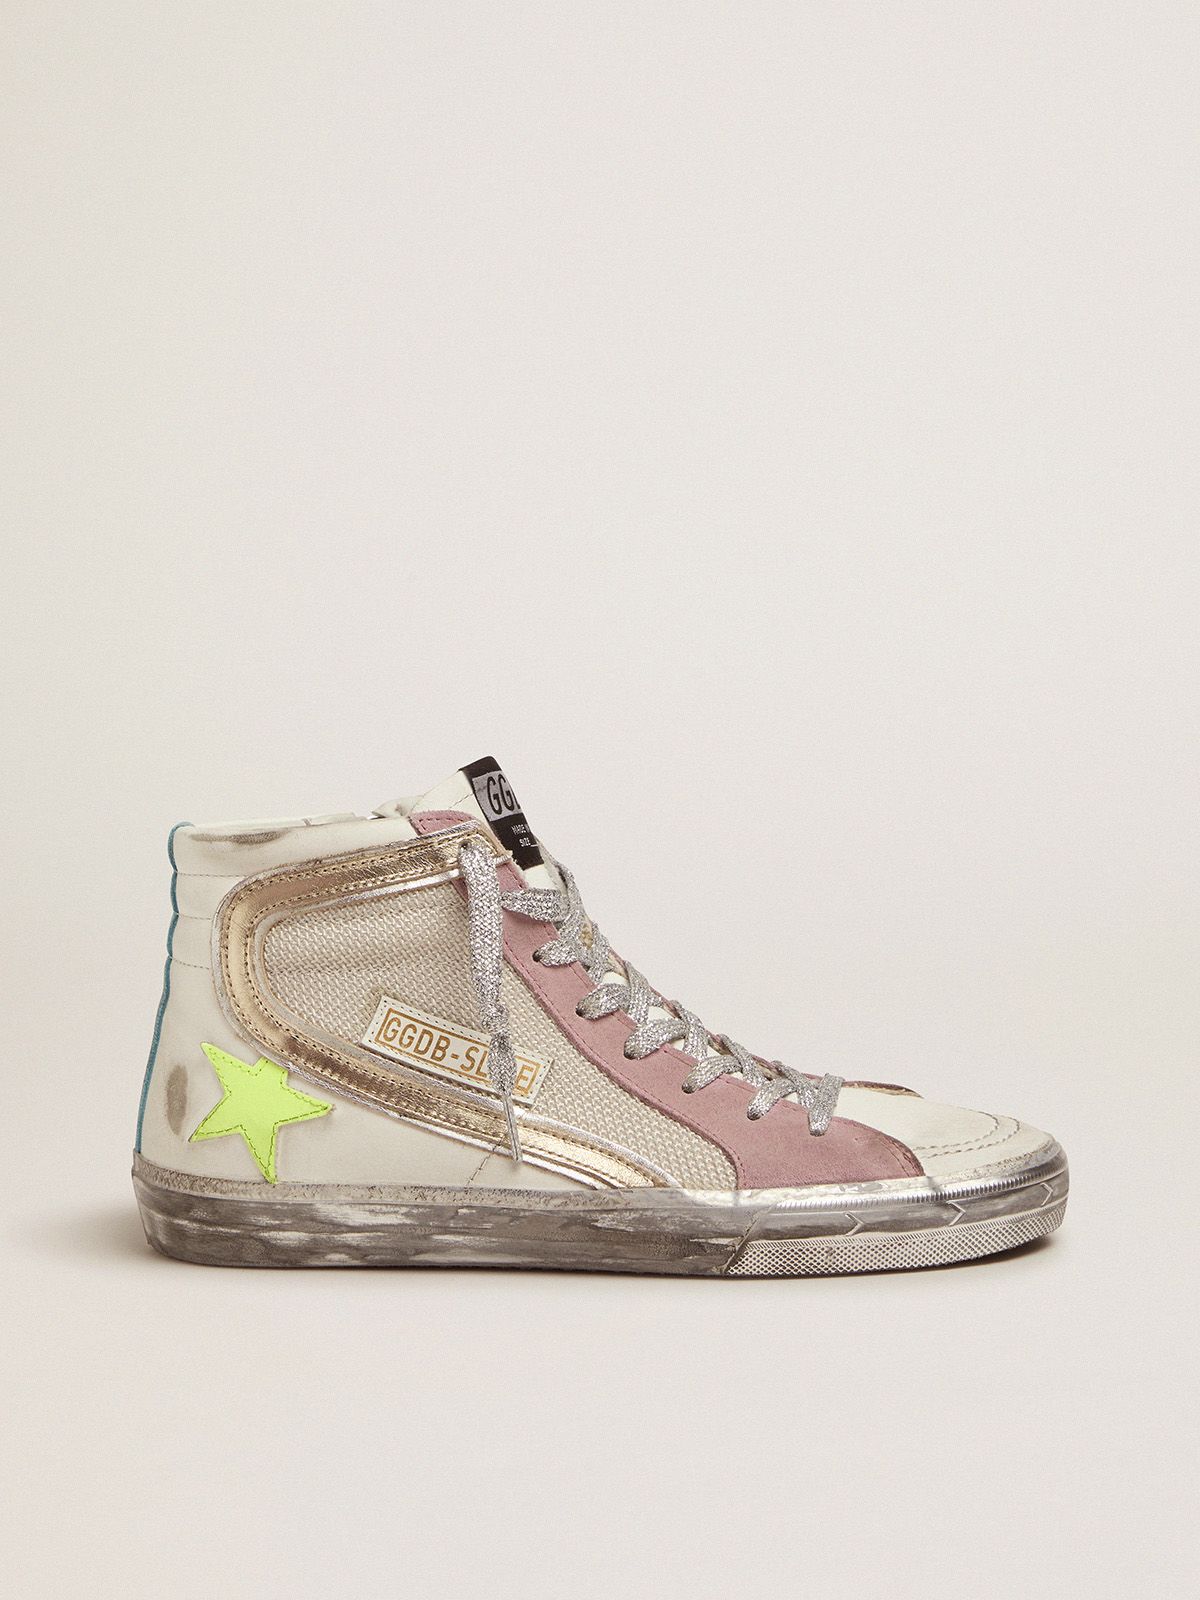 Golden Goose Bambina Slide sneakers with white and pink upper